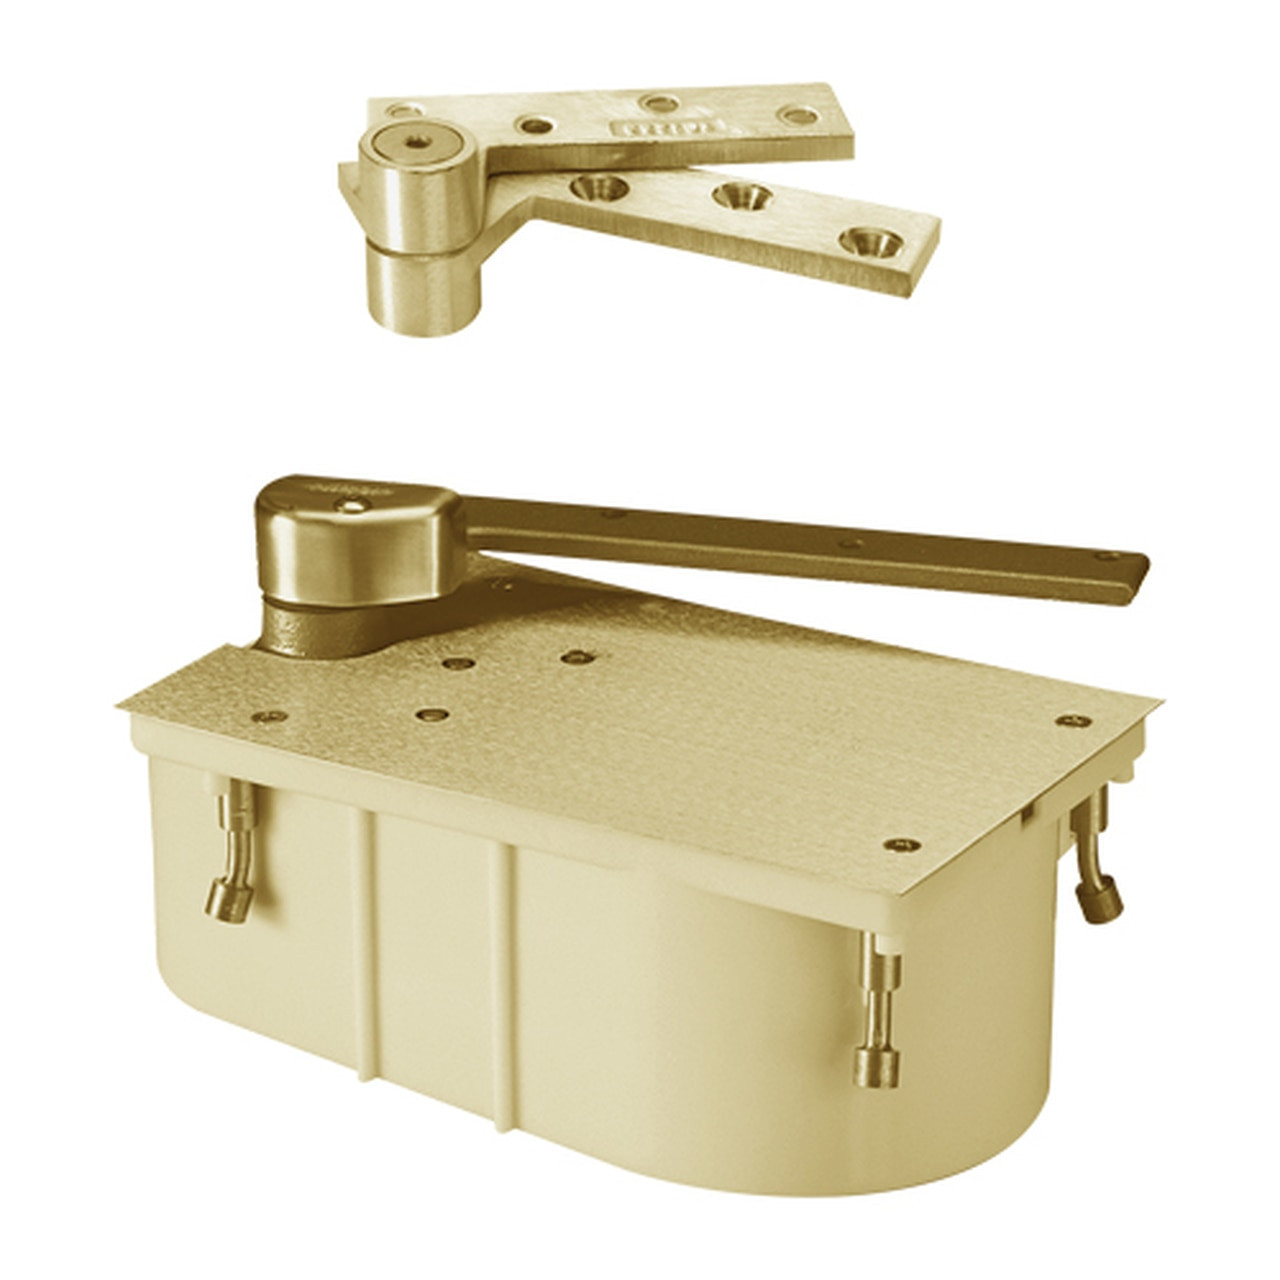 F27-95N-CWF-LH-606 Rixson 27 Series Fire Rated Heavy Duty 3/4" Offset Hung Floor Closer in Satin Brass Finish